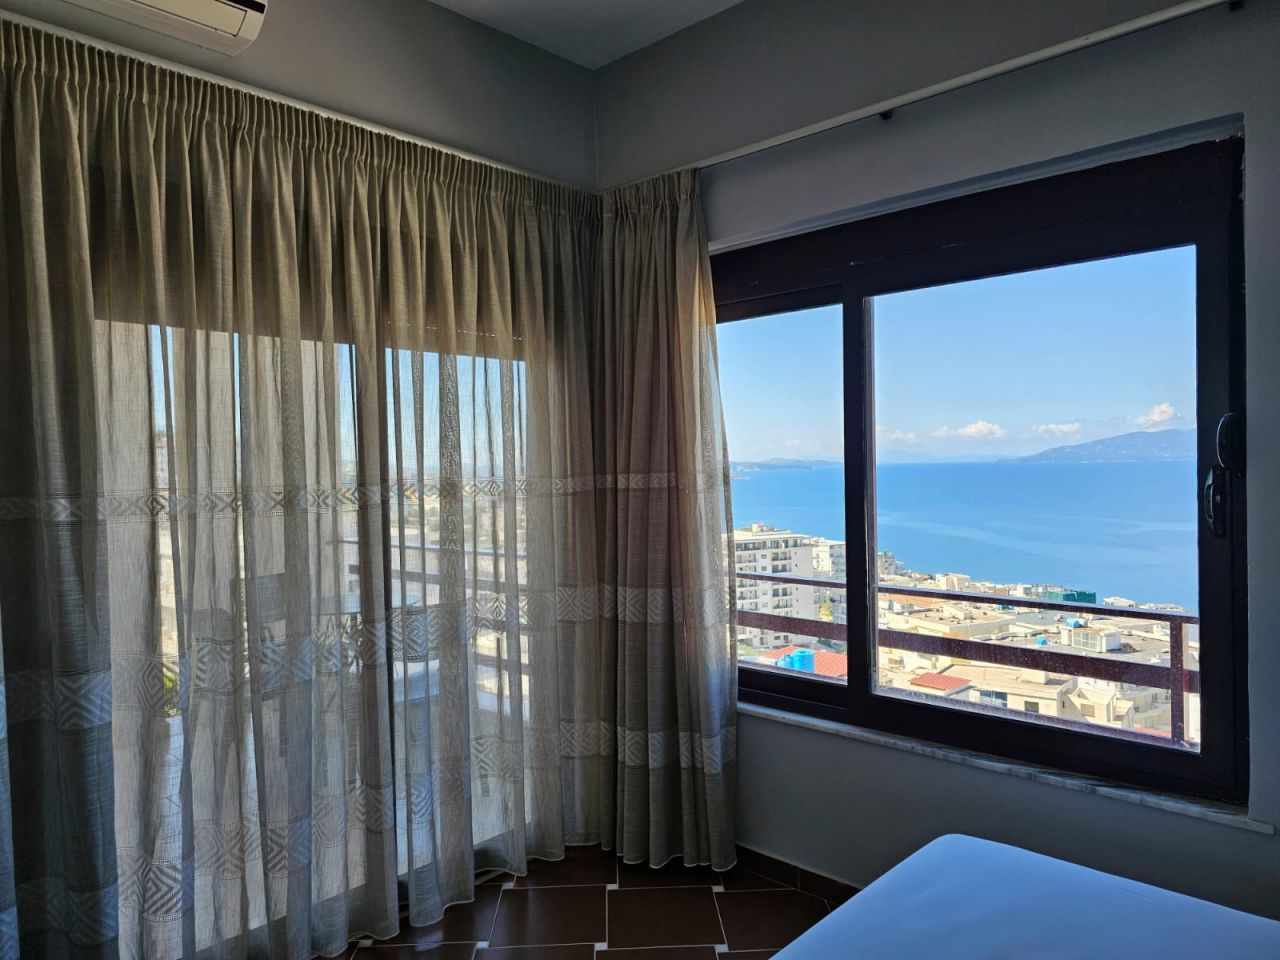 Apartment For Sale In Saranda Albania, With Panoramic Sea View, Well Furnished And An Excellent Construction